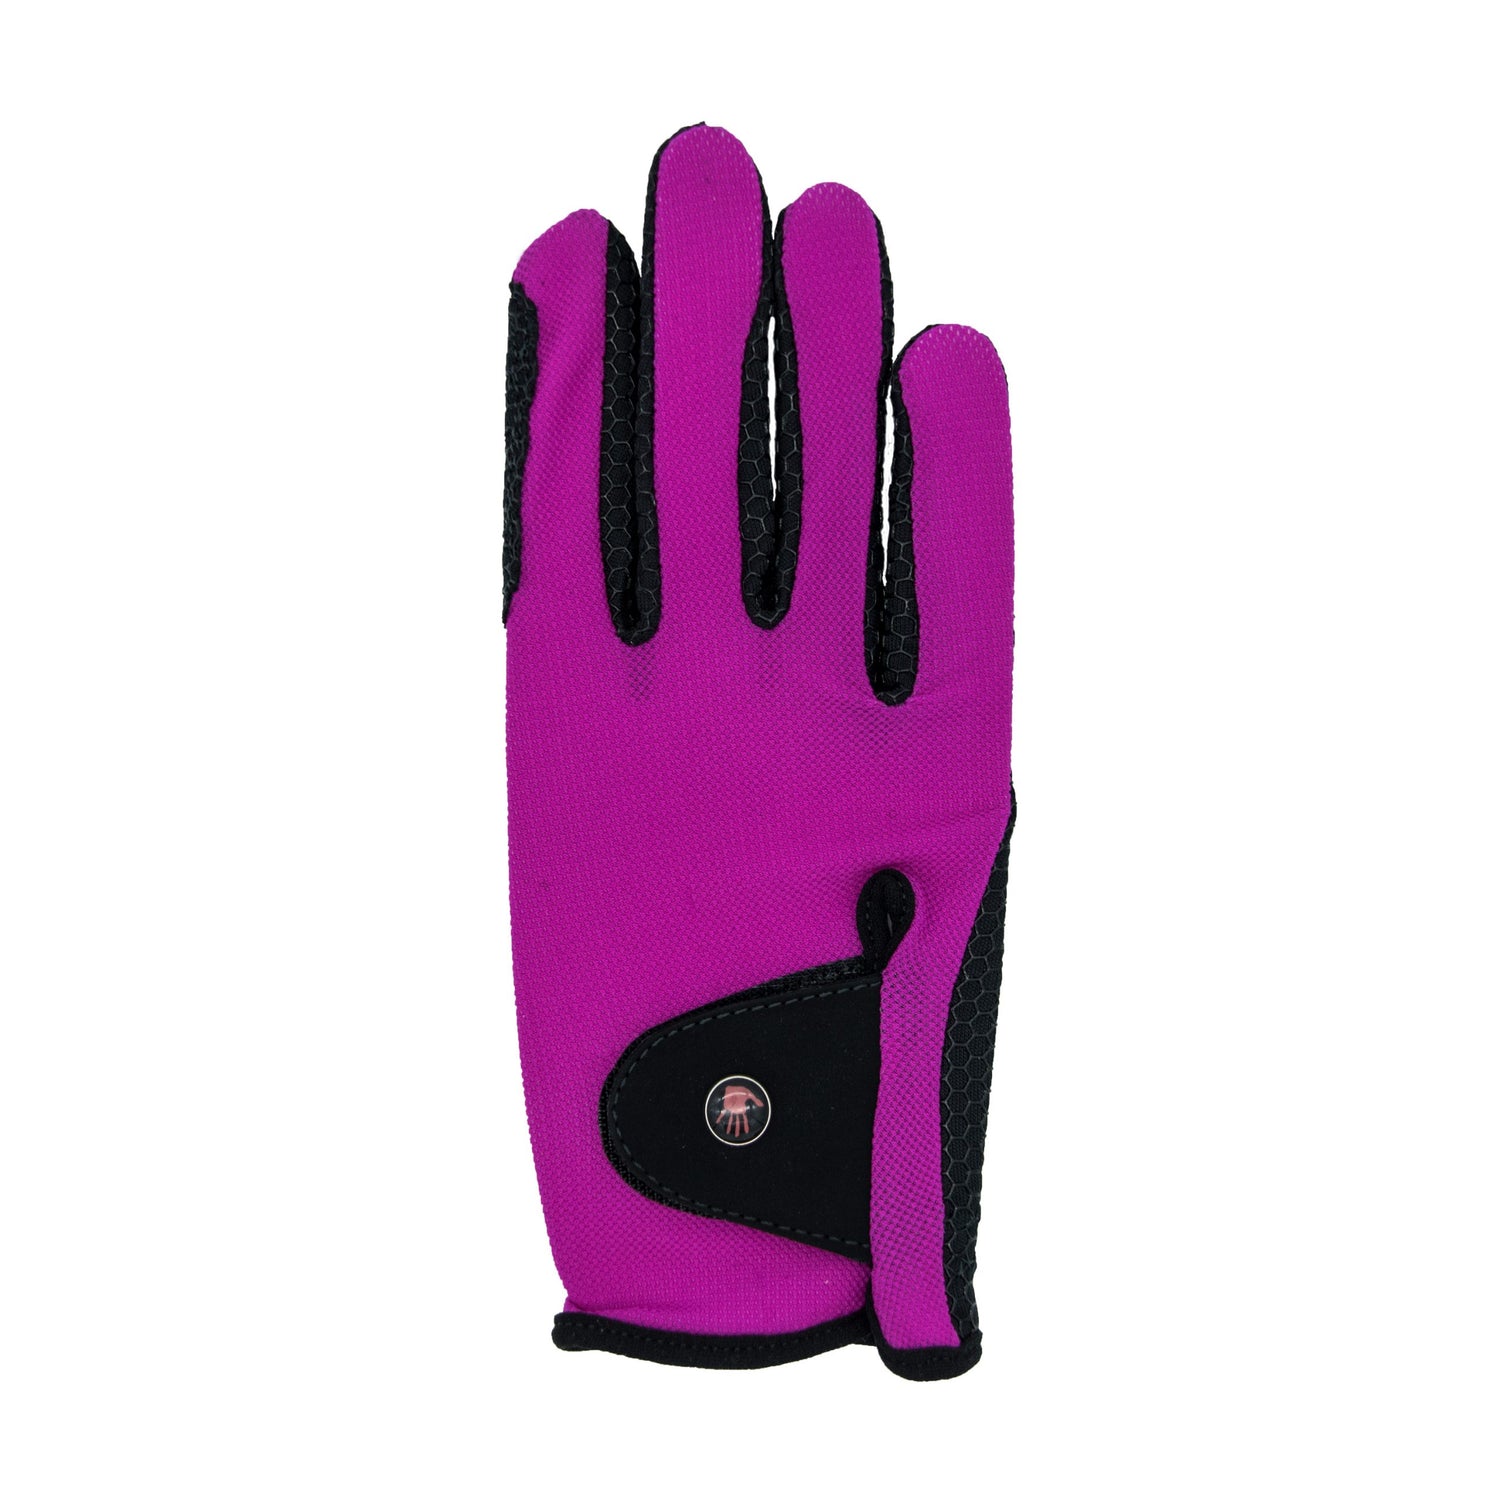 Light summertime gloves for riders in pink